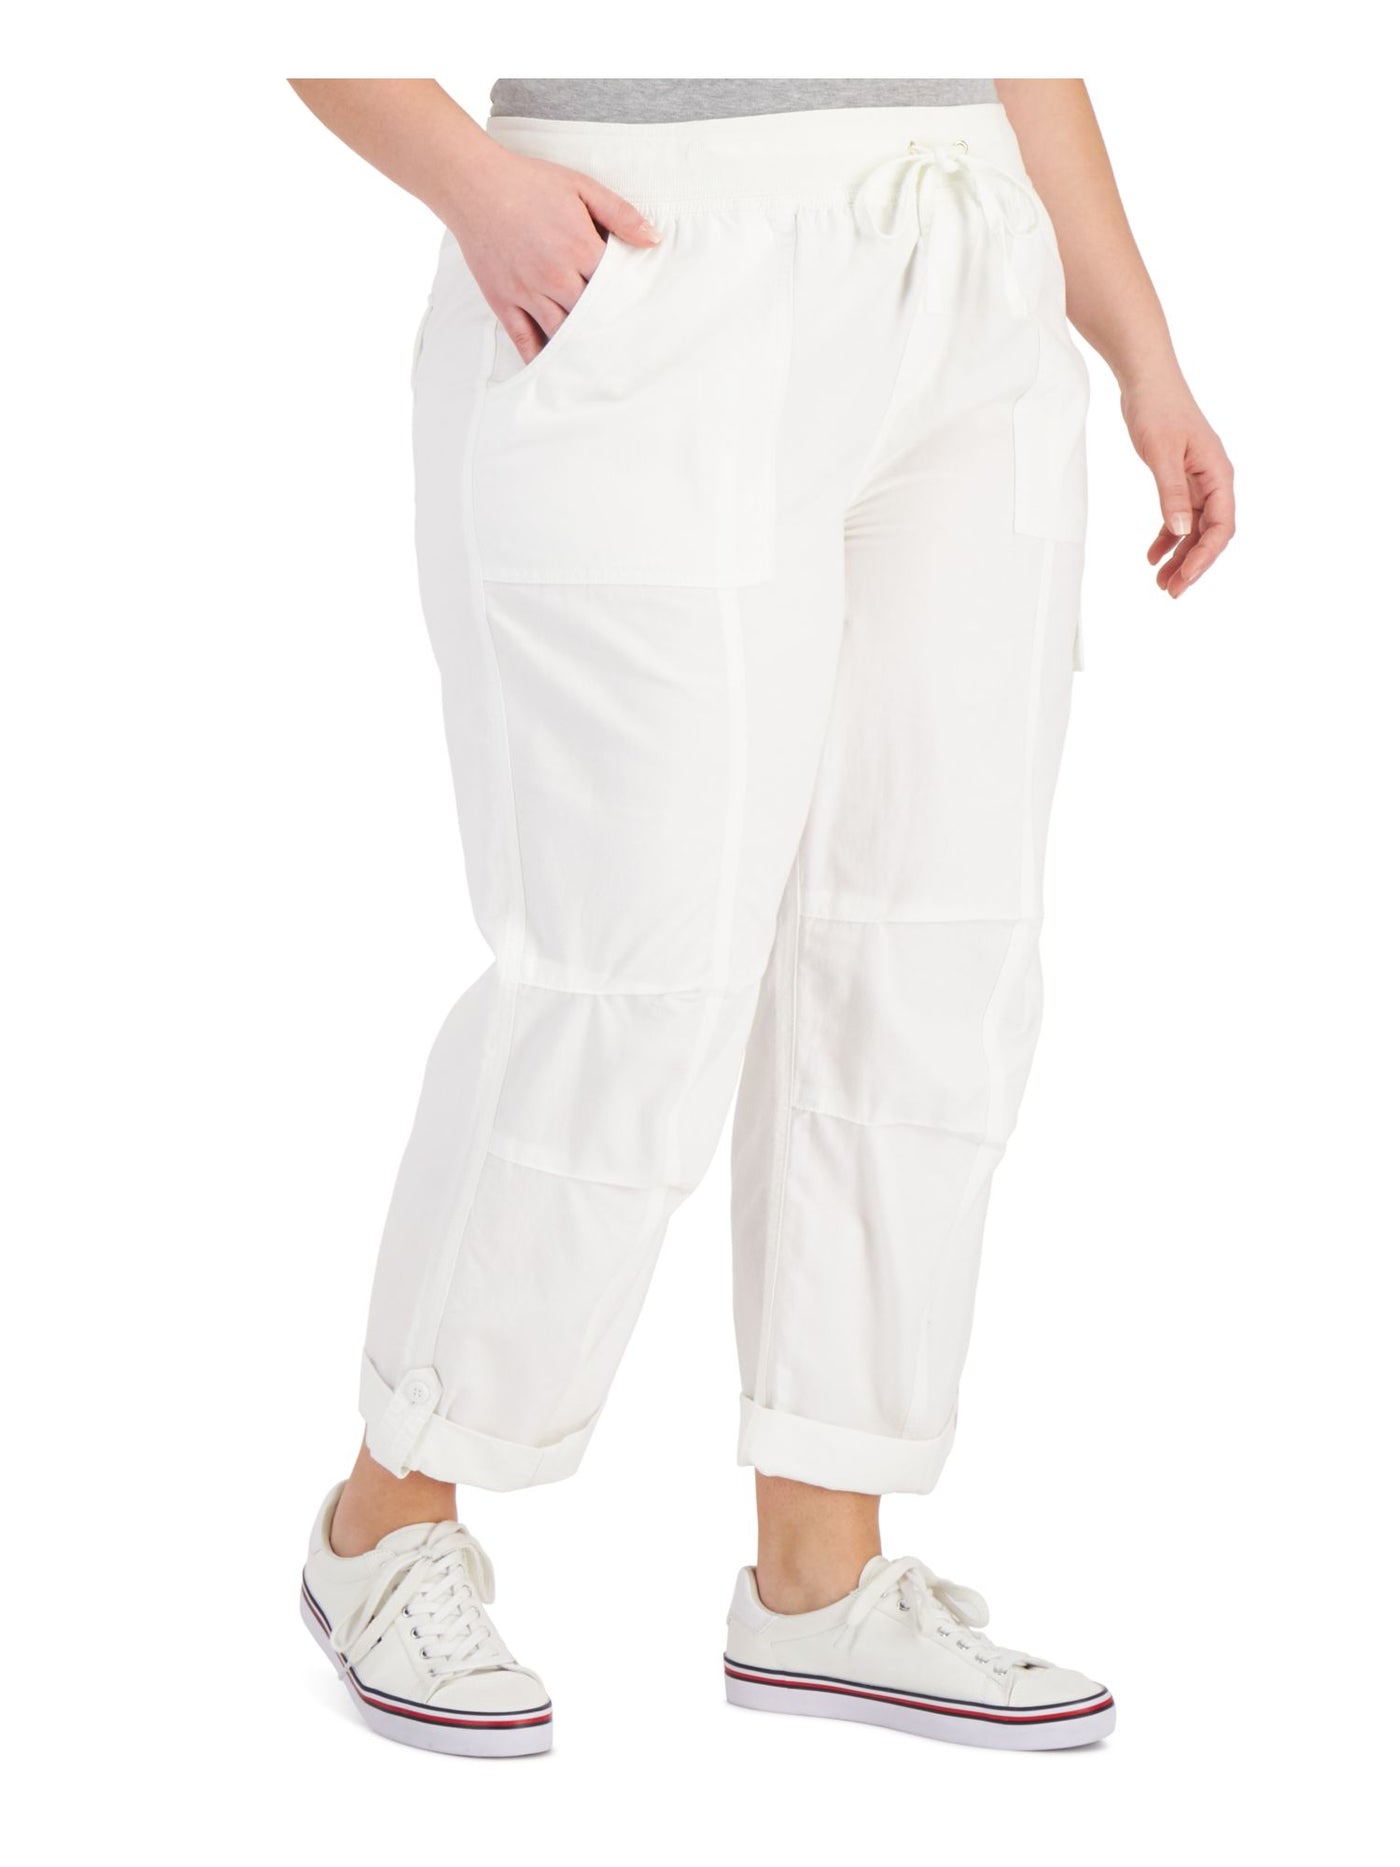 TOMMY HILFIGER Womens White Pocketed Adjustable Cuffed Pants Plus 2X